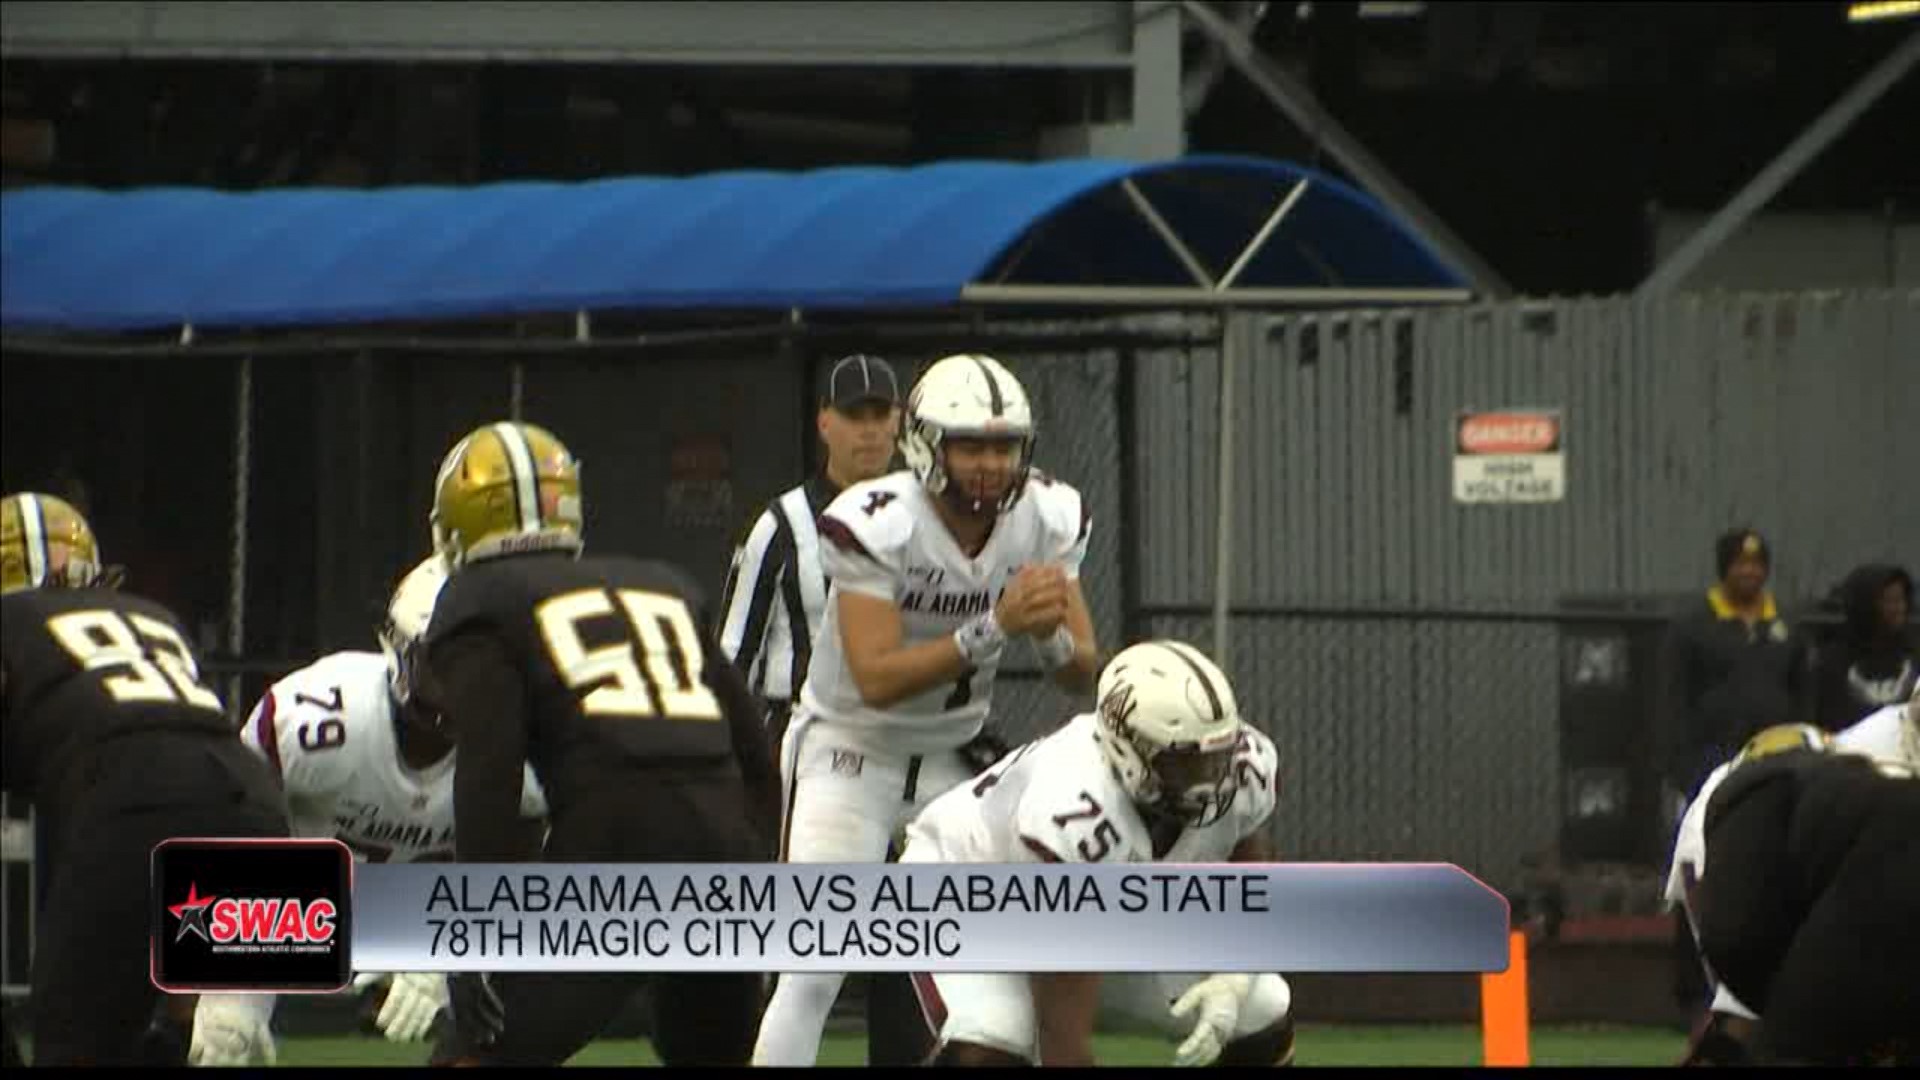 Aqeel Glass threw a two-point conversion pass to Jordan Bentley that made the difference as Alabama A&M beat Alabama State 43-41 in triple overtime on Saturday.